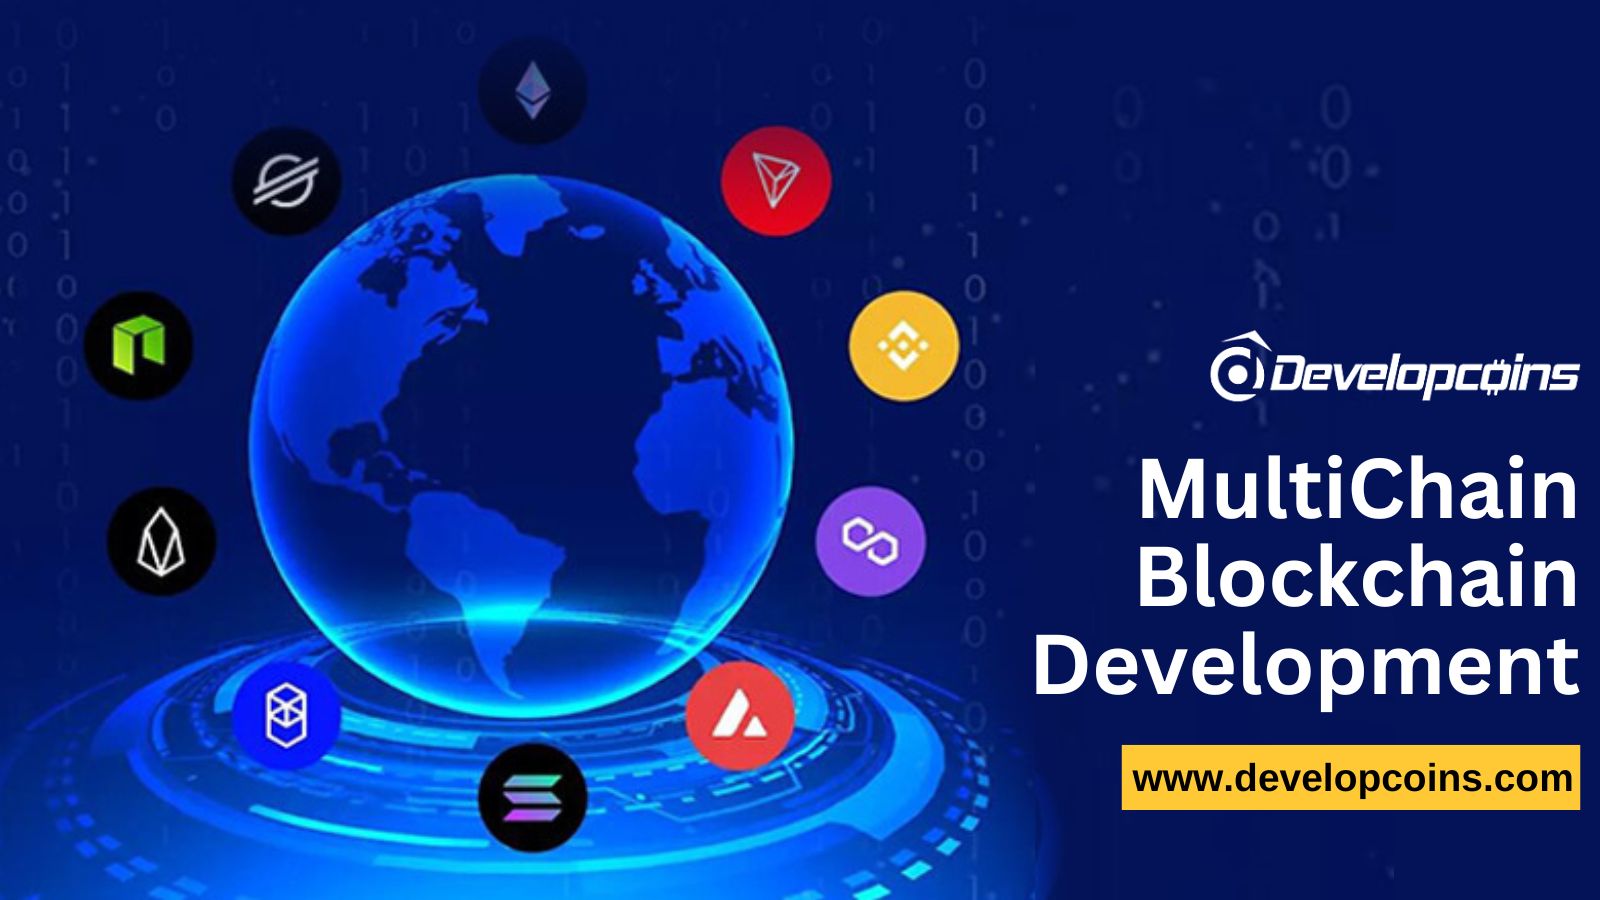 Multichain Blockchain Development - To Captivate Blockchain Business & Stay Ahead In Your Competitive Edge